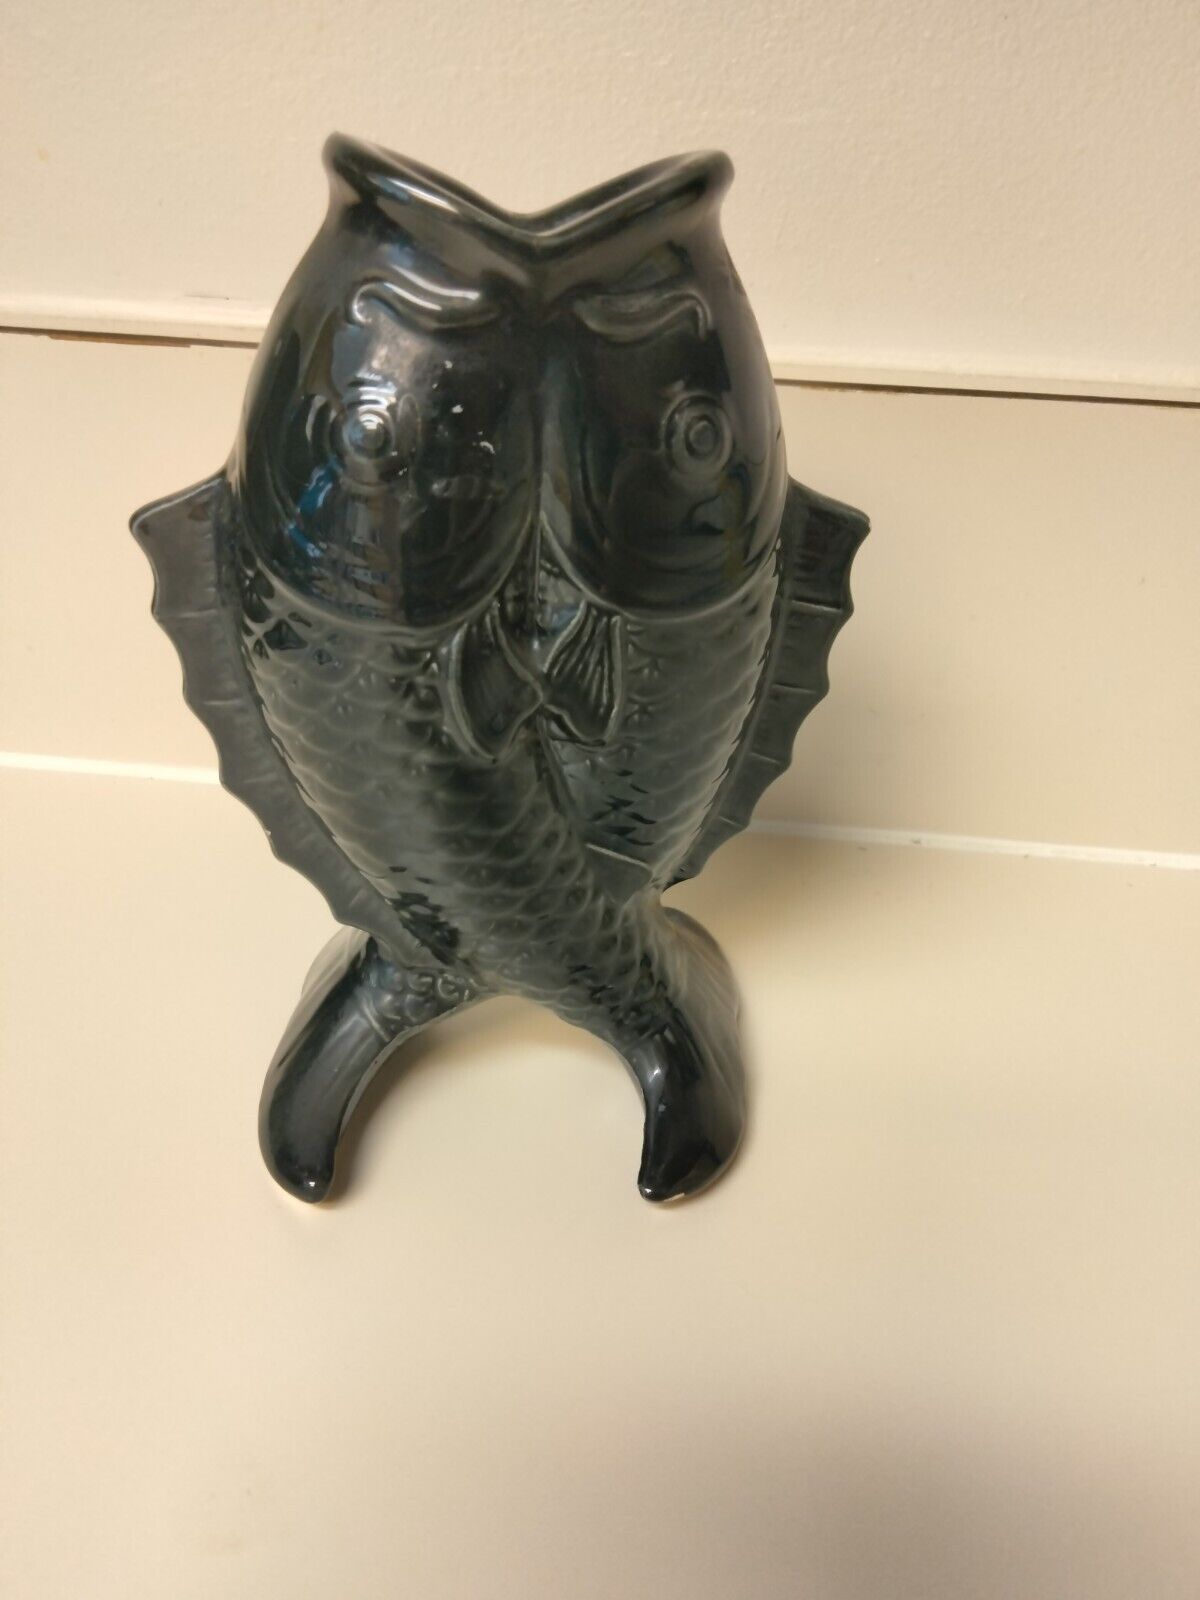 Quon Quon Japan 1980 Vintage Koi Black Fish Candle Holder oriental free standing